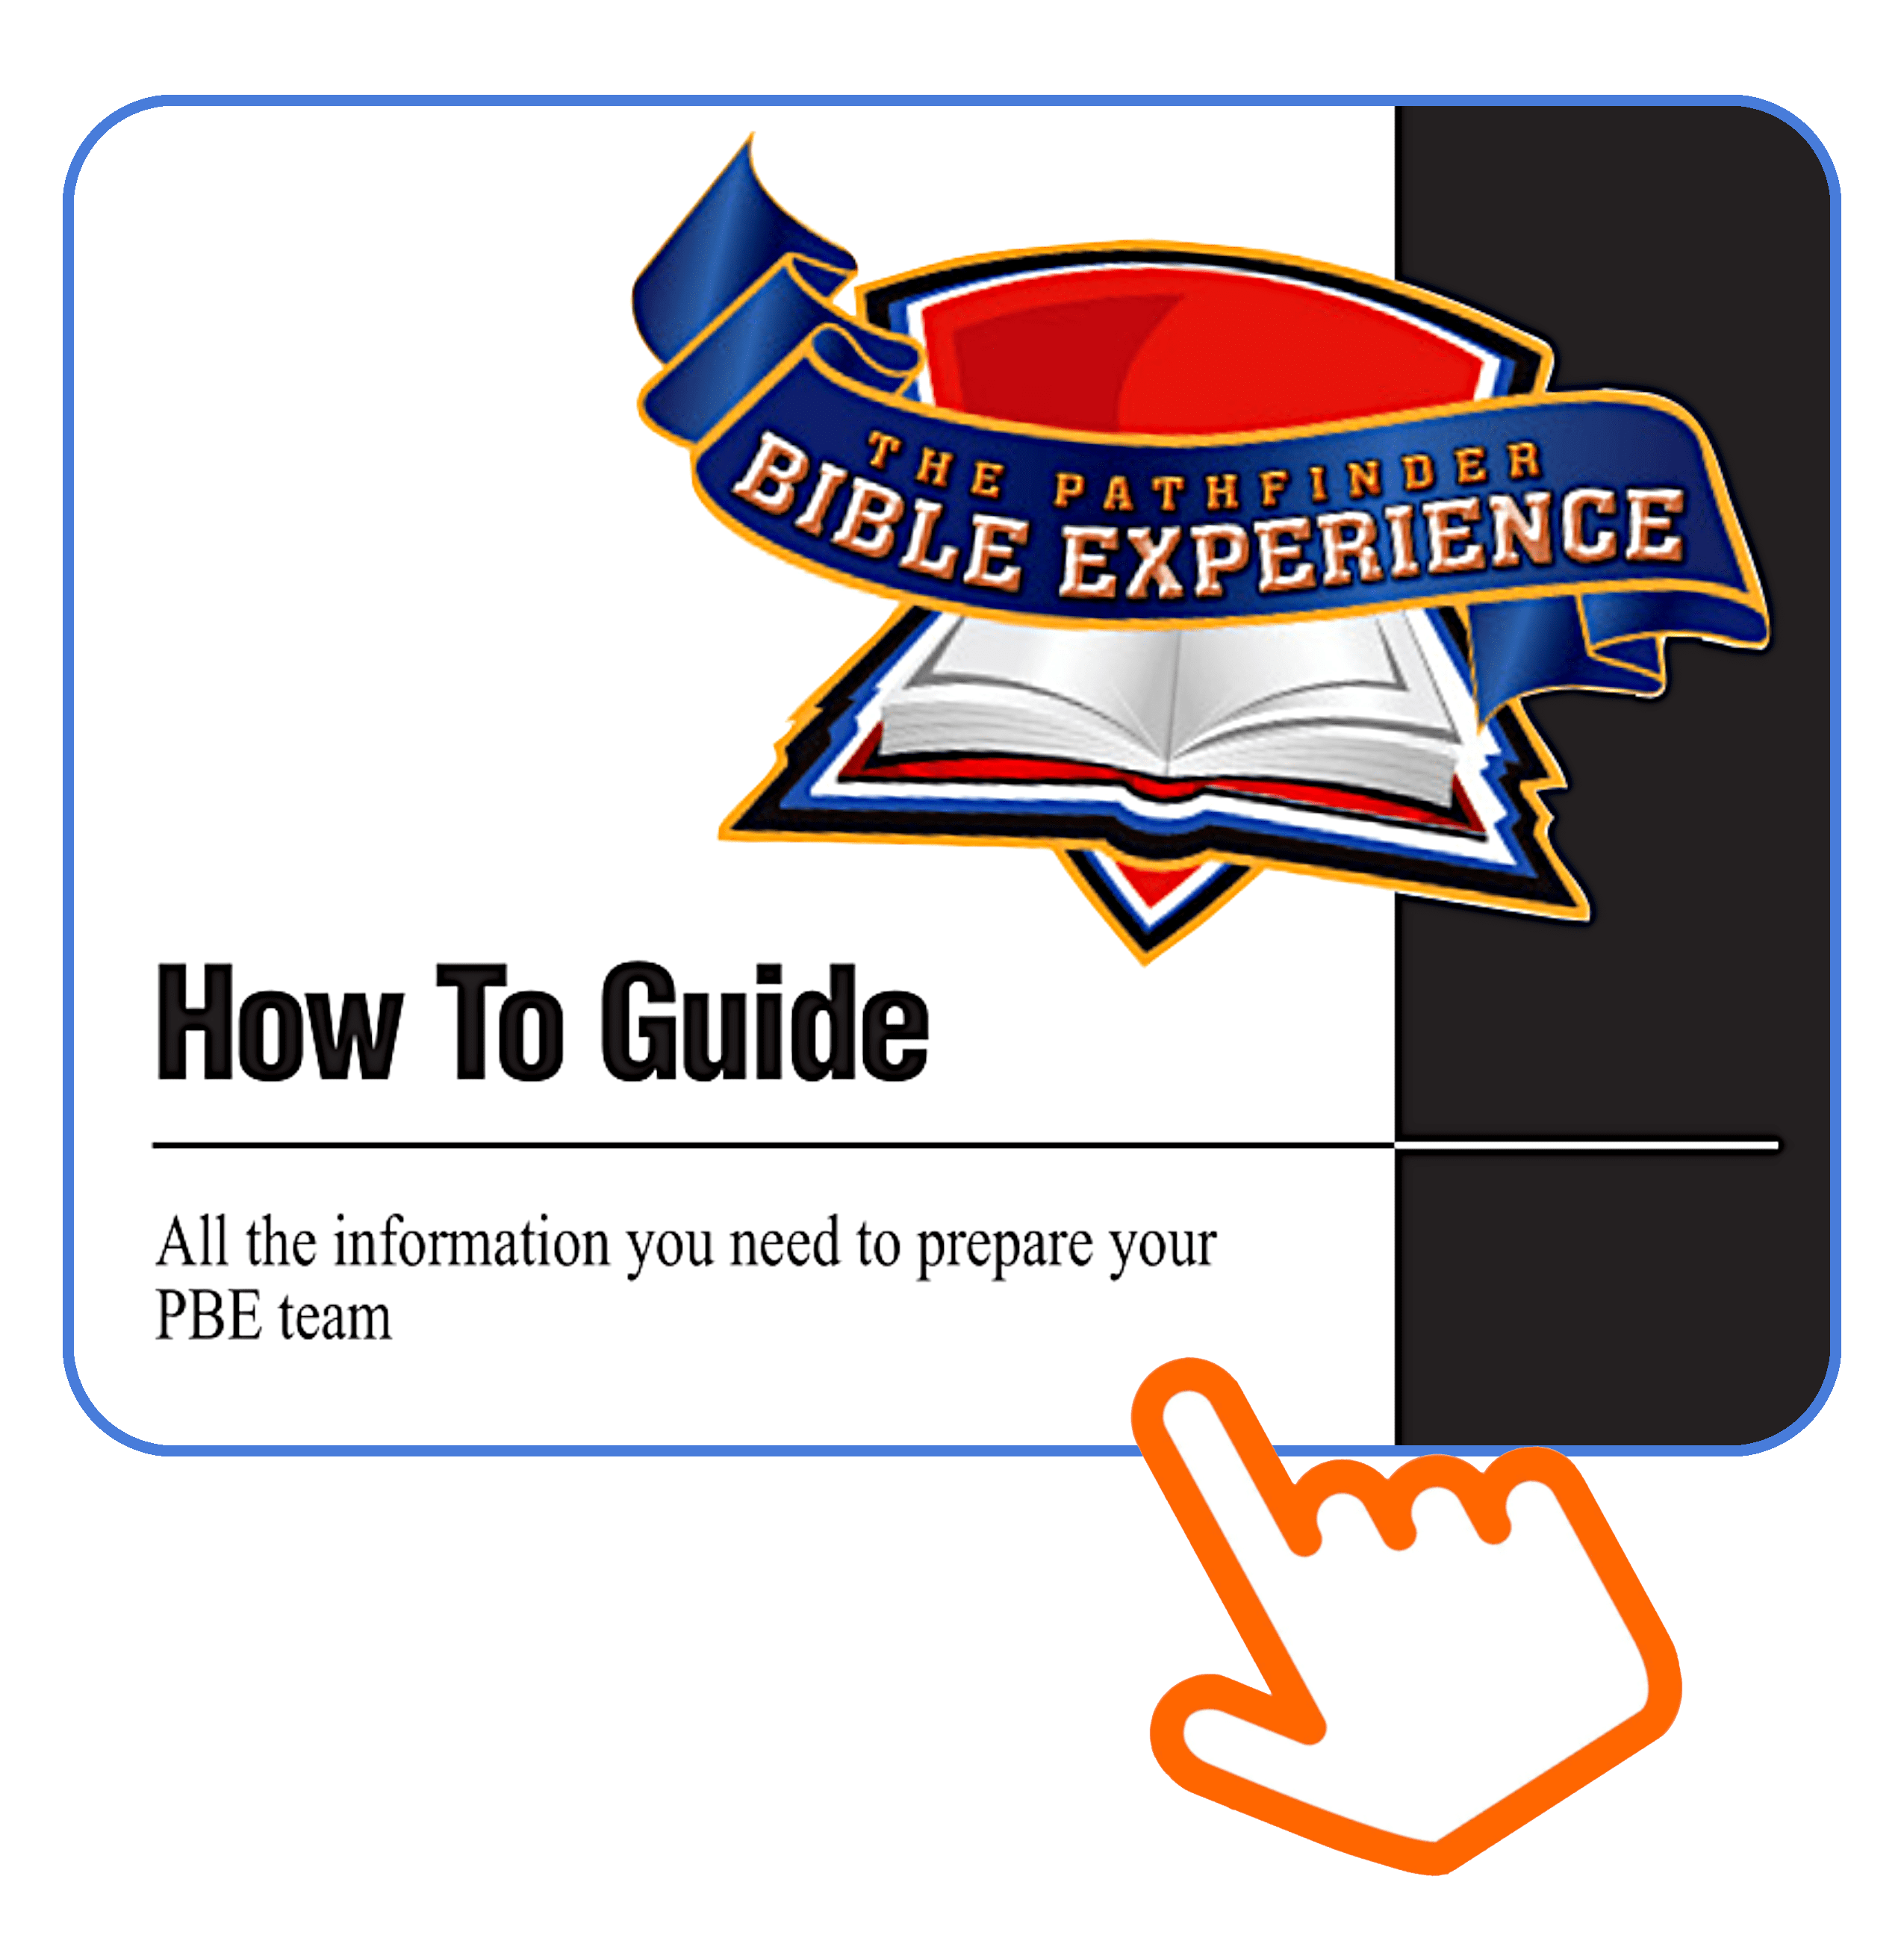 HowToGuide